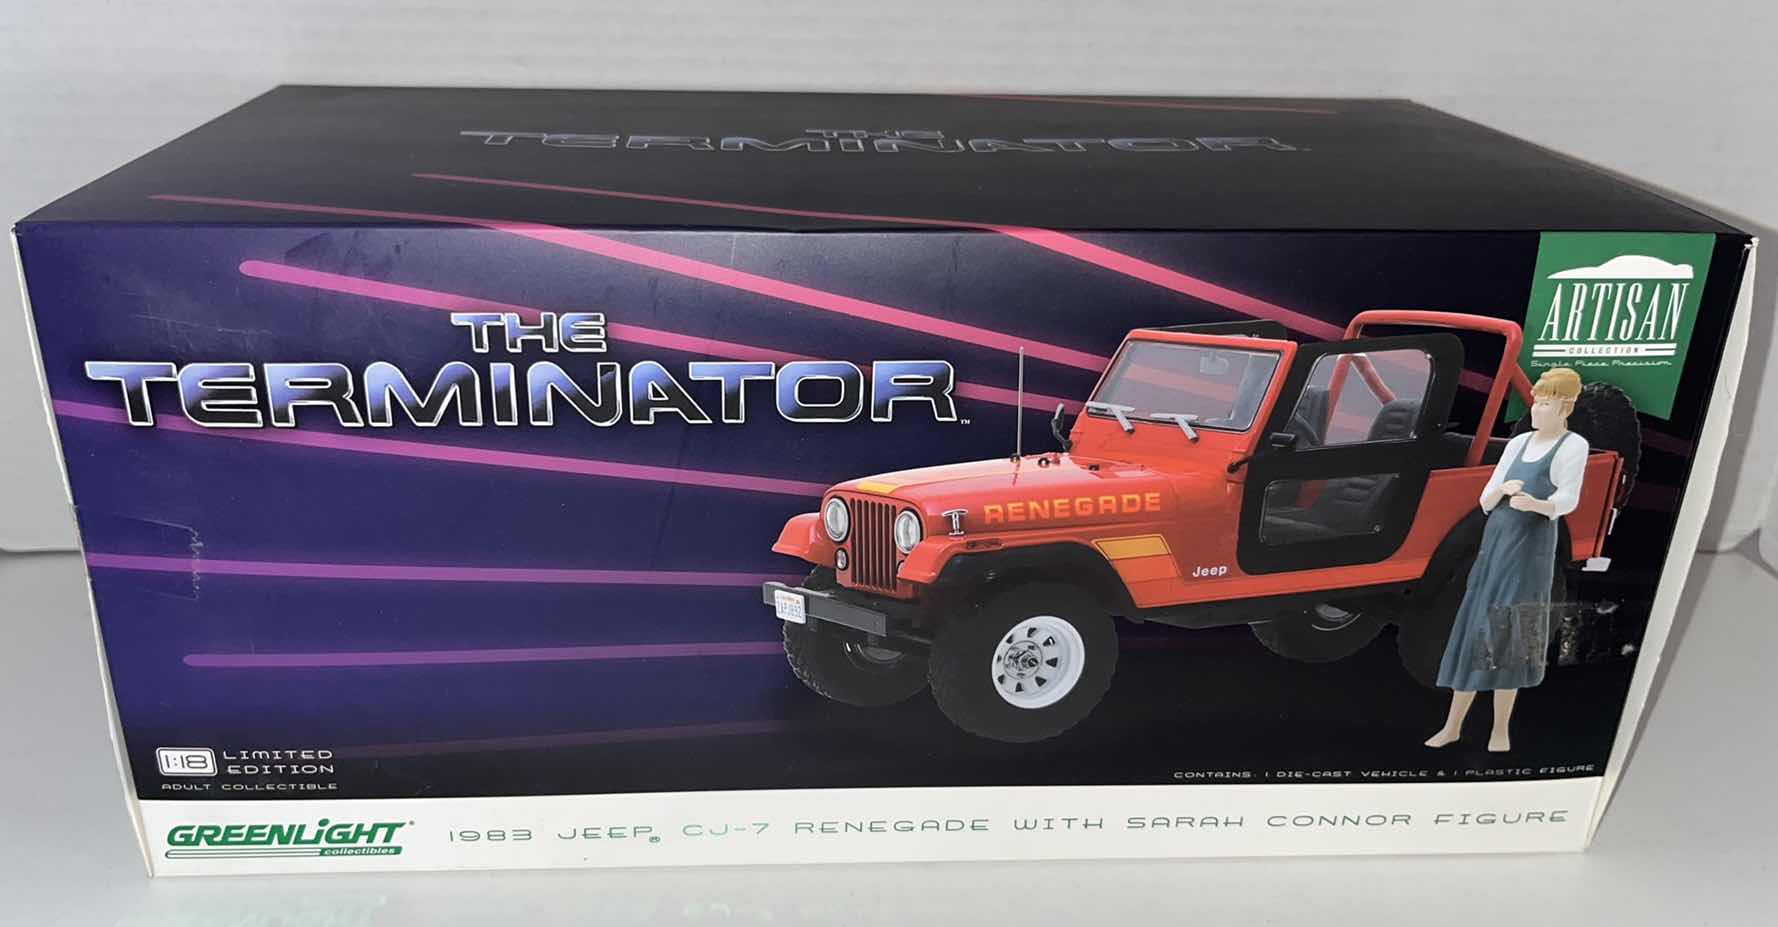 Photo 1 of BRAND NEW GREENLIGHT COLLECTIBLES ARTISAN COLLECTION LIMITED EDITION THE TERMINATOR 1983 JEEP CJ-7 RENEGADE W SARAH CONNOR FIGURE (1)